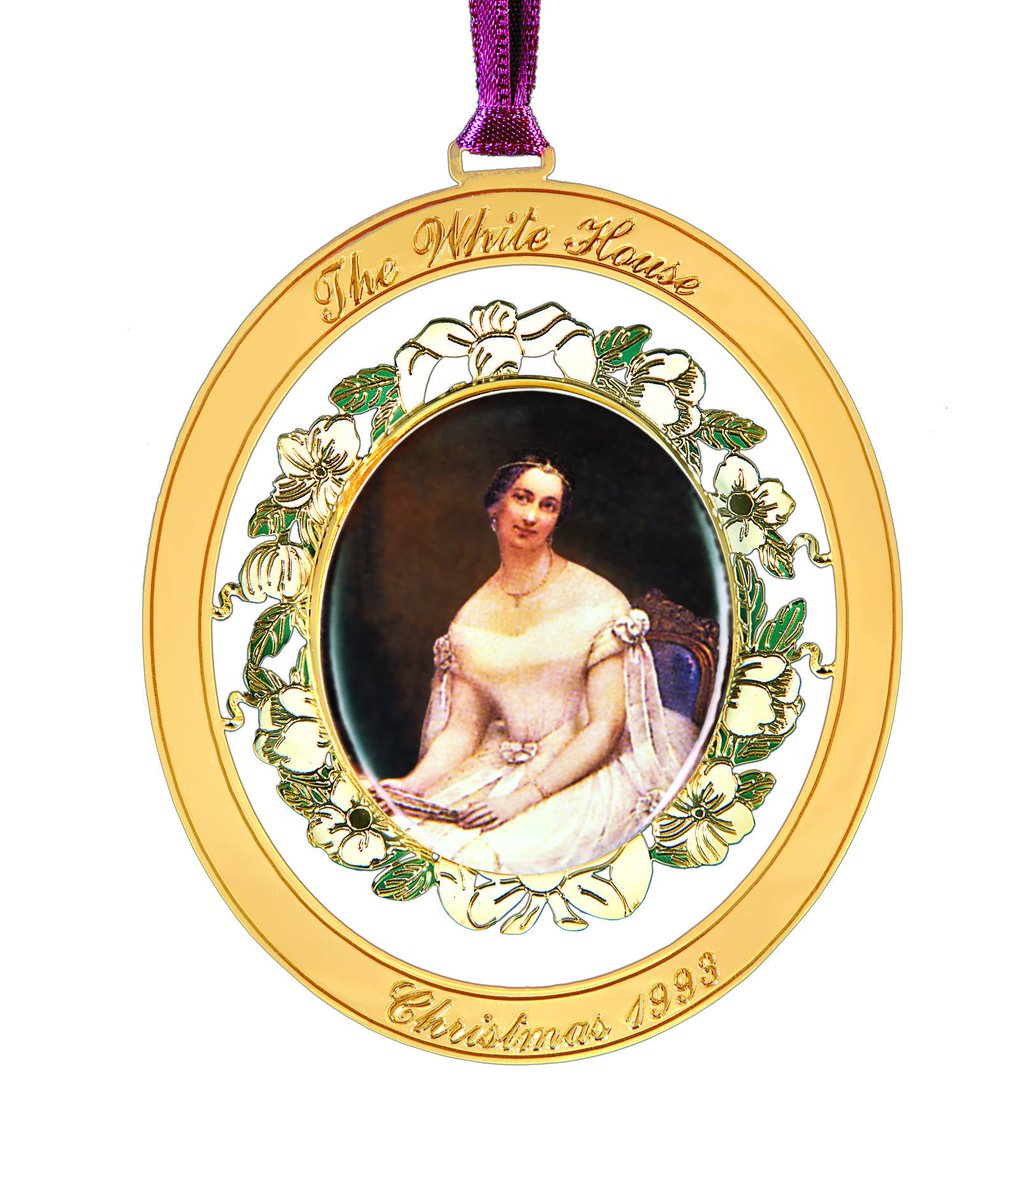 The 1993 ornament features a portrait of First Lady Julia Tyler. President John Tyler was the first to marry while in office. Her portrait was the first of a comprehensive White House collection of portraits of the first ladies. https://shop.whitehousehistory.org/holidays/ornaments/1990-1993-four-white-hour-ornaments-sold-as-a-set